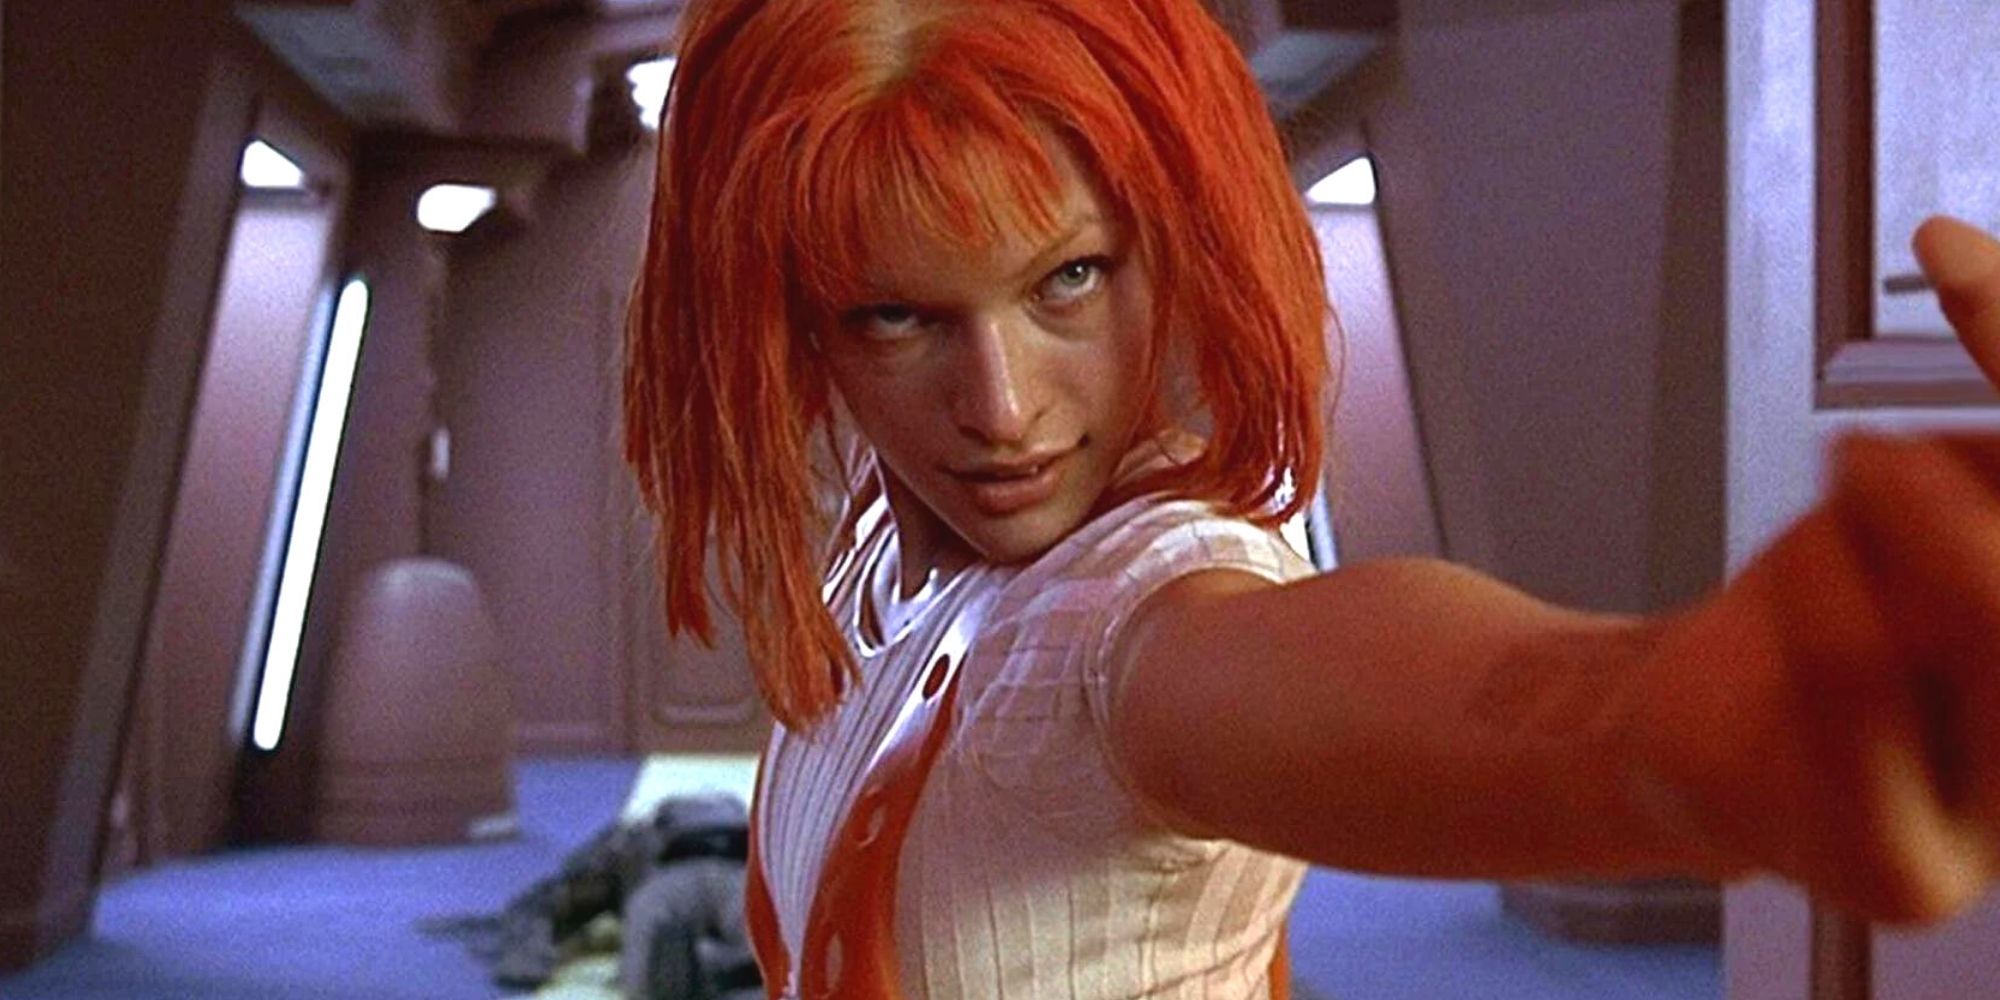 The Fifth Element LeeLoo reaches out his arm